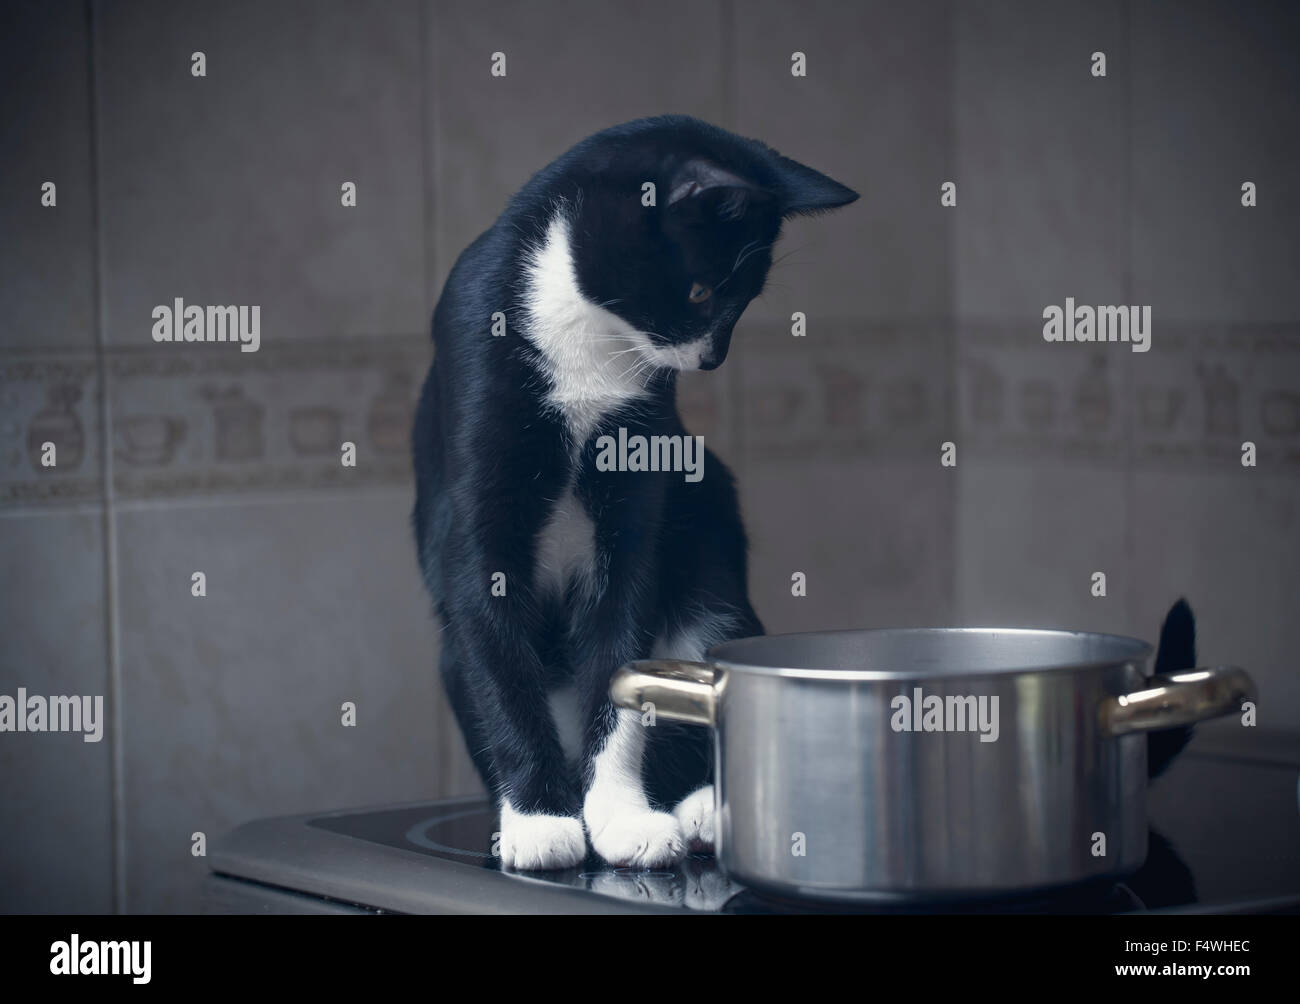 black and white cat looking interested in cooking pot Stock Photo